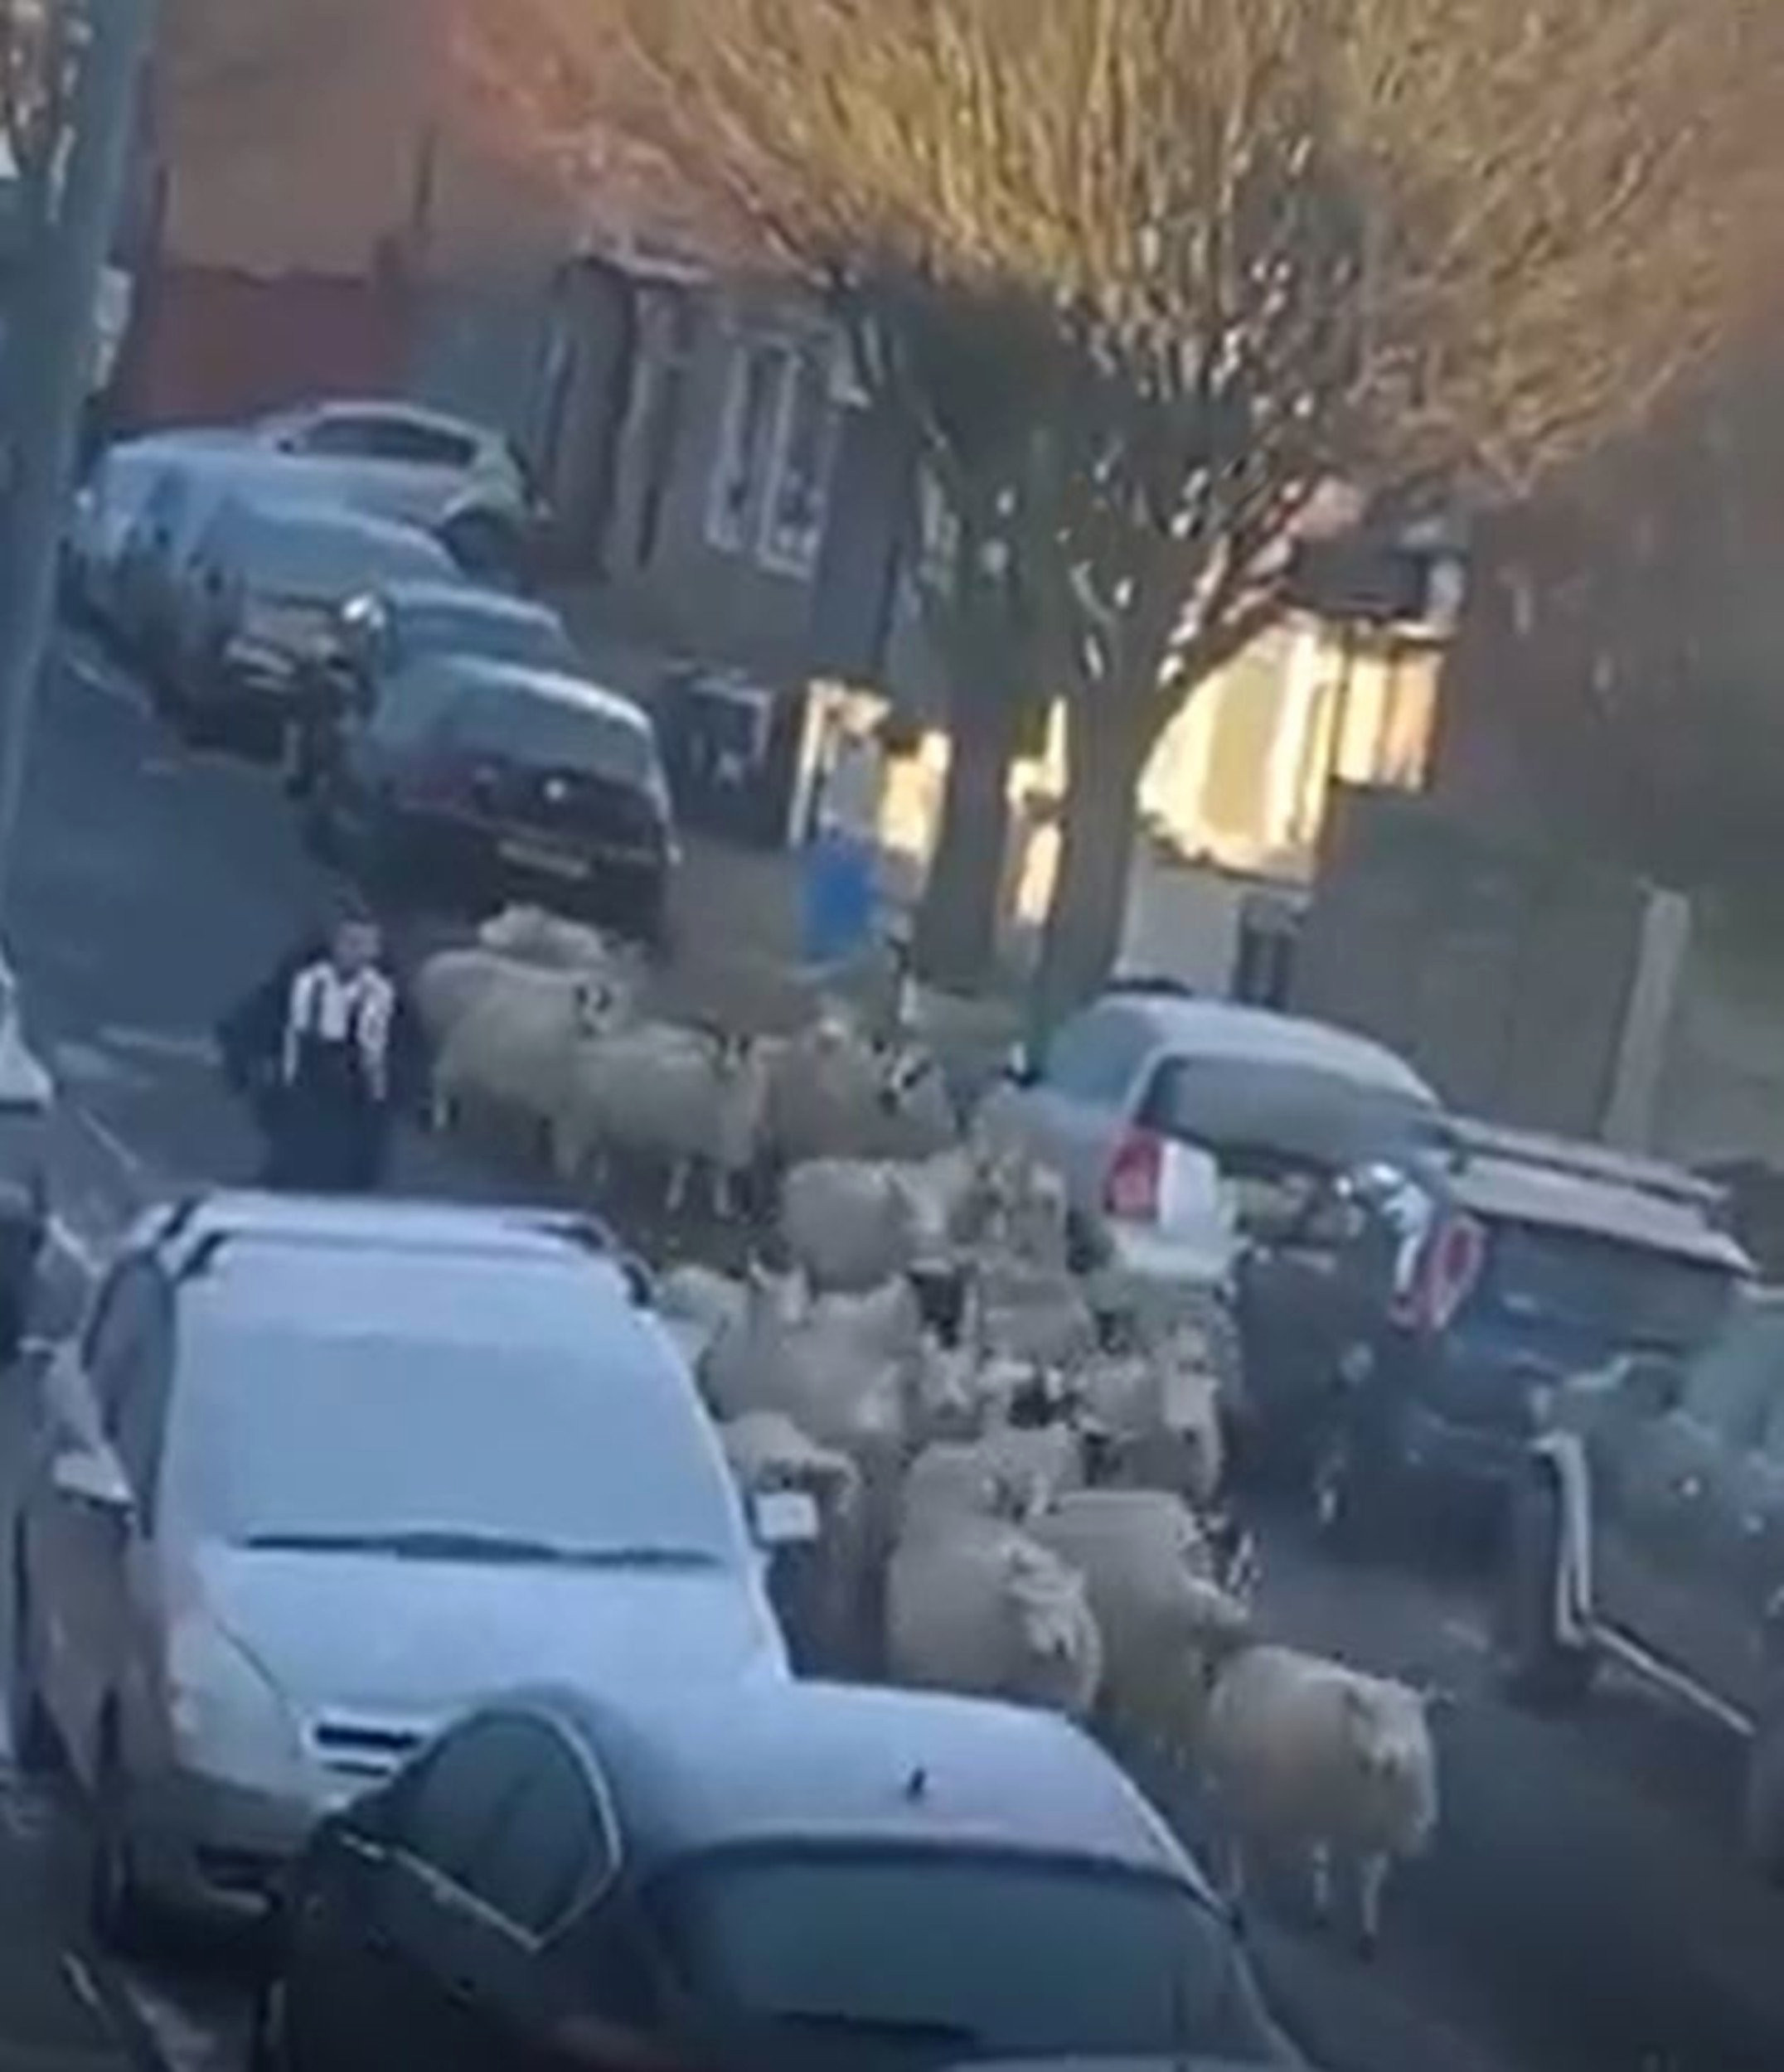 Sheep run for their lives down residential street after ‘escaping abattoir’